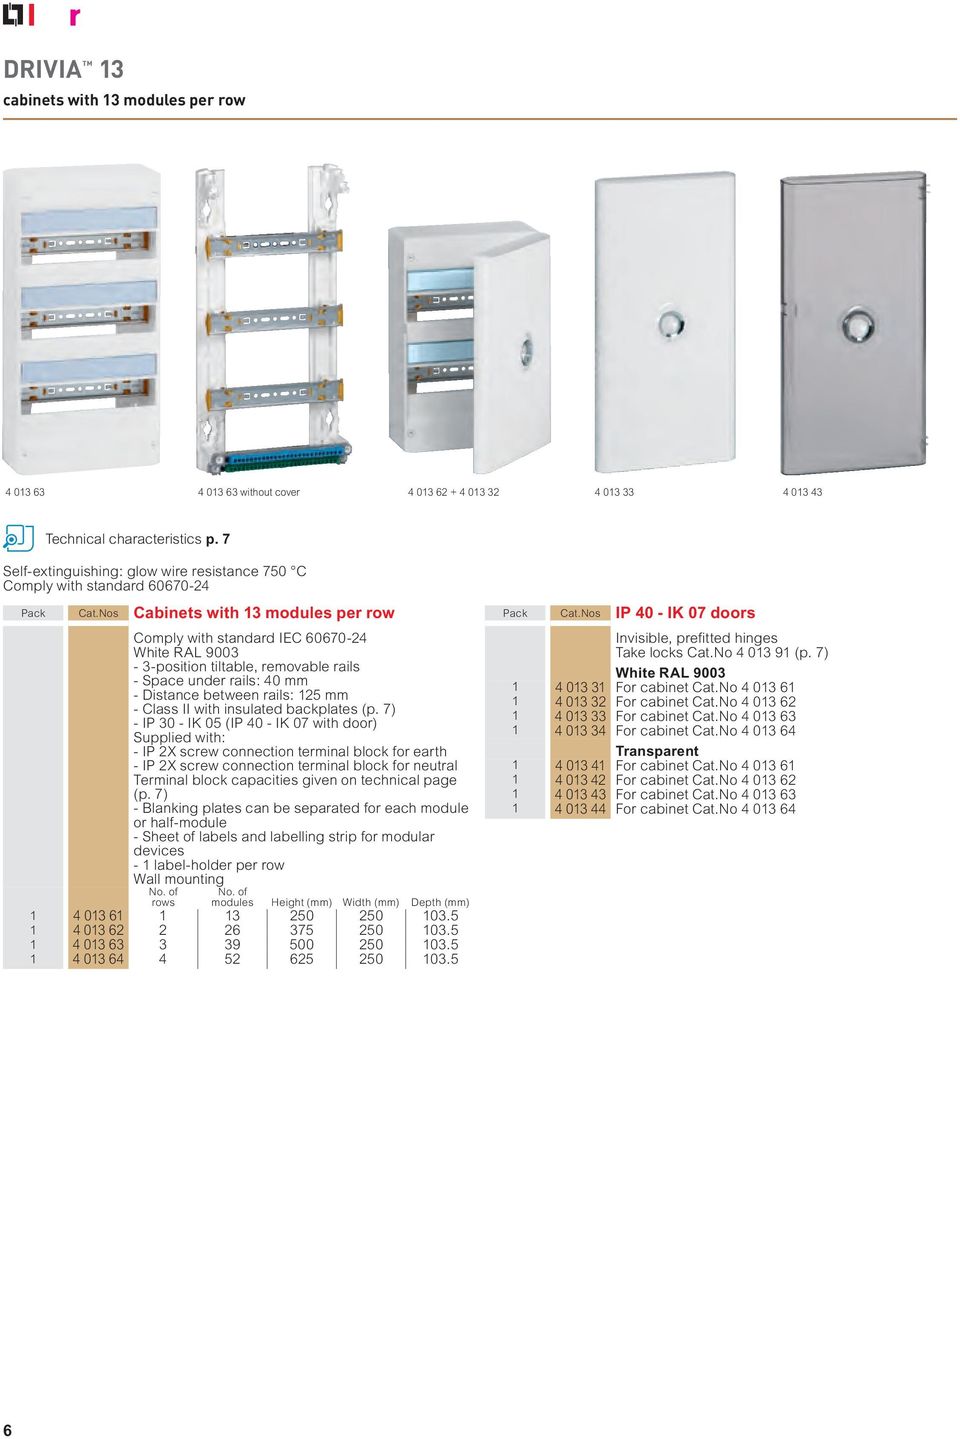 Nos Cabinets with 13 modules per row Comply with standard IEC 60670-24 White RAL 9003-3-position tiltable, removable rails - Space under rails: 40 mm - Distance between rails: 125 mm - Class II with